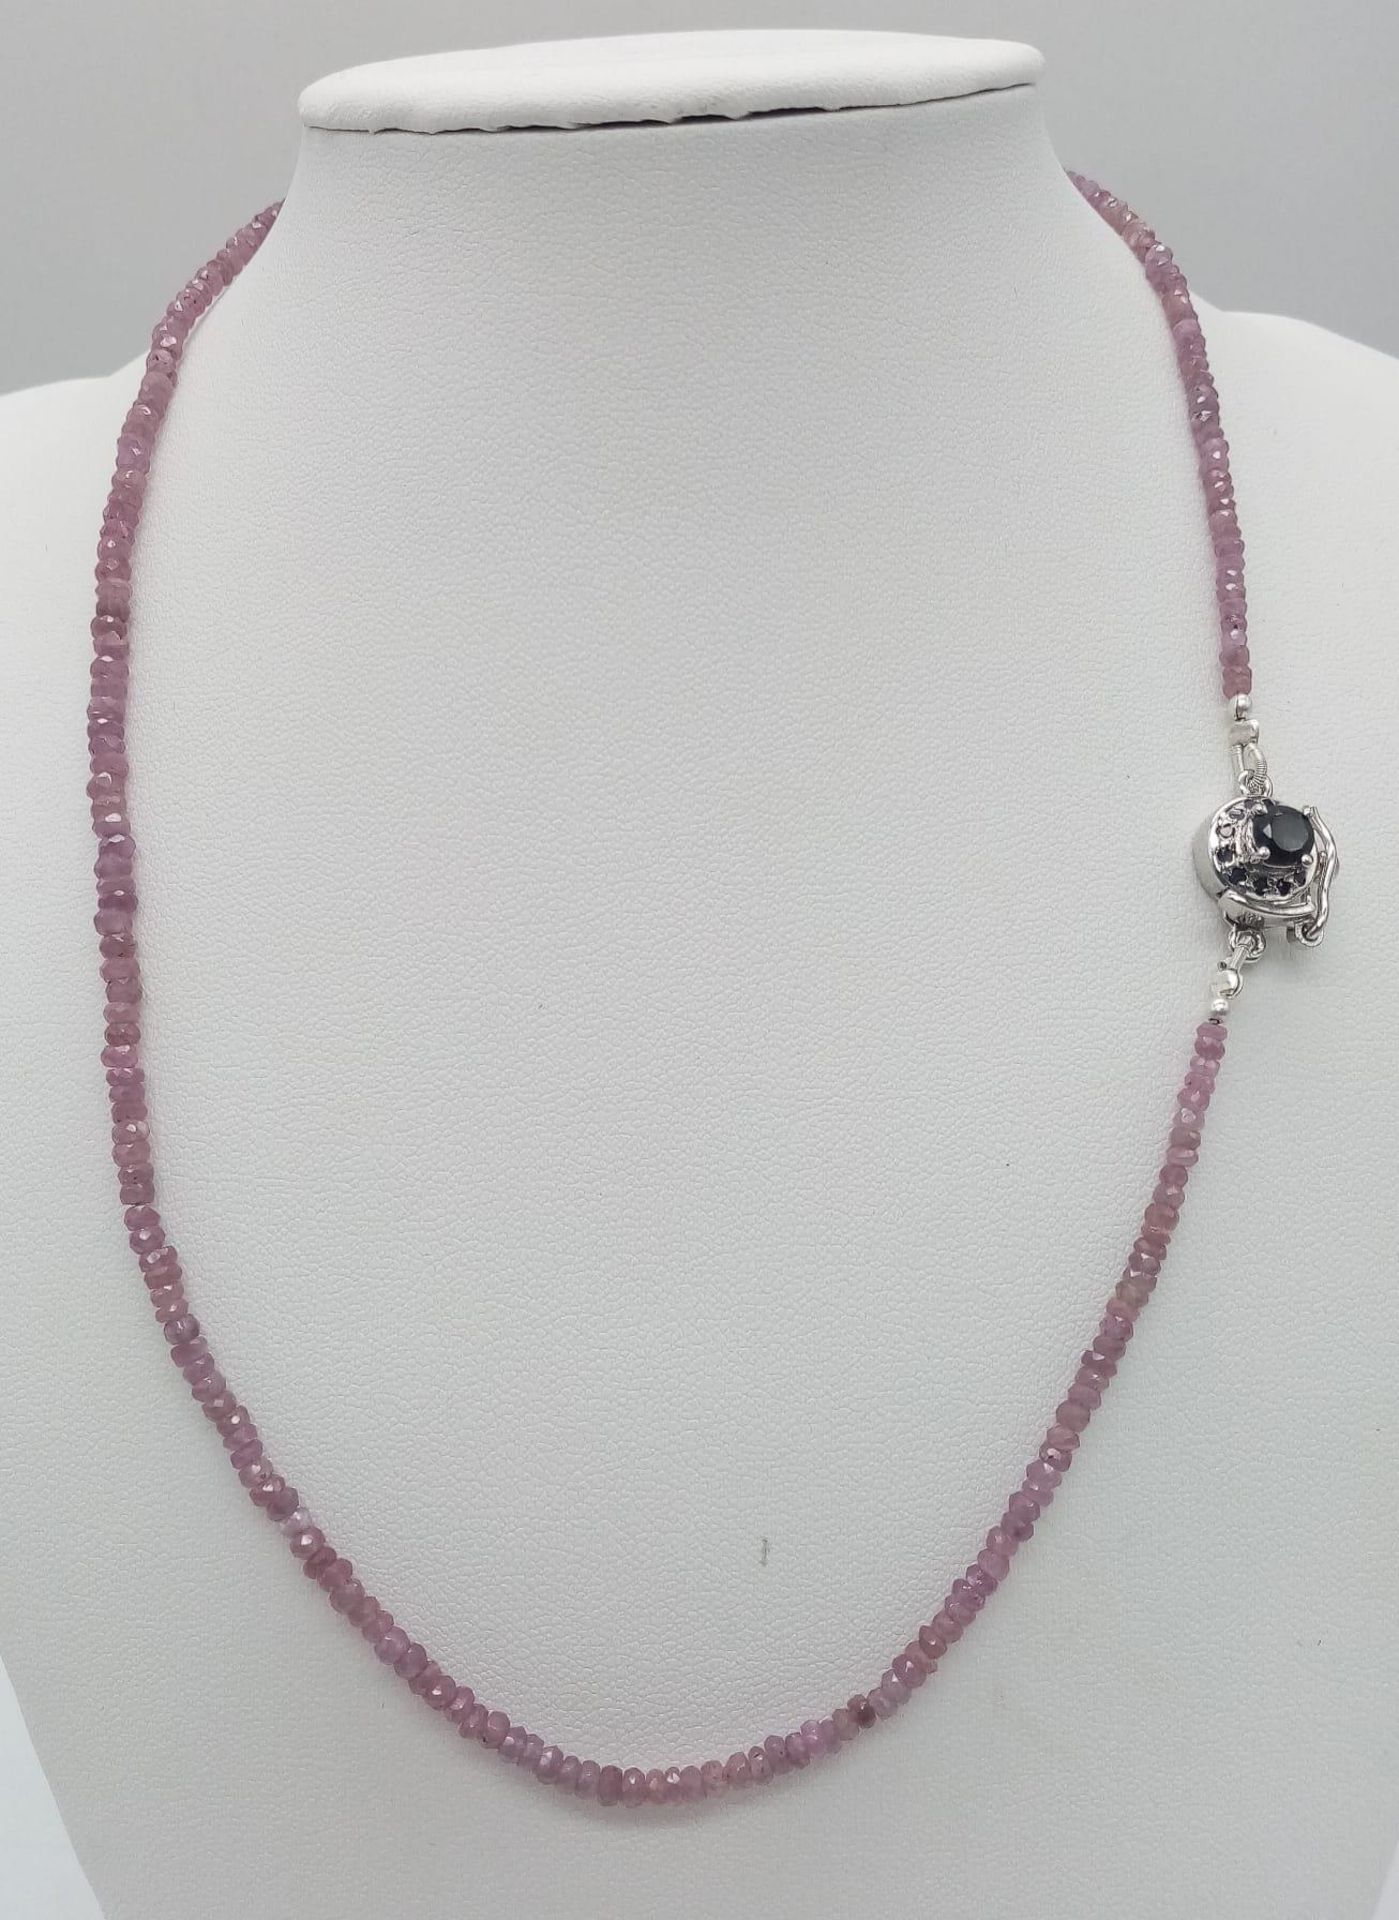 A Single Strand Pink Sapphire Necklace with Ruby and 925 Silver Clasp. 42cm length. - Image 2 of 4